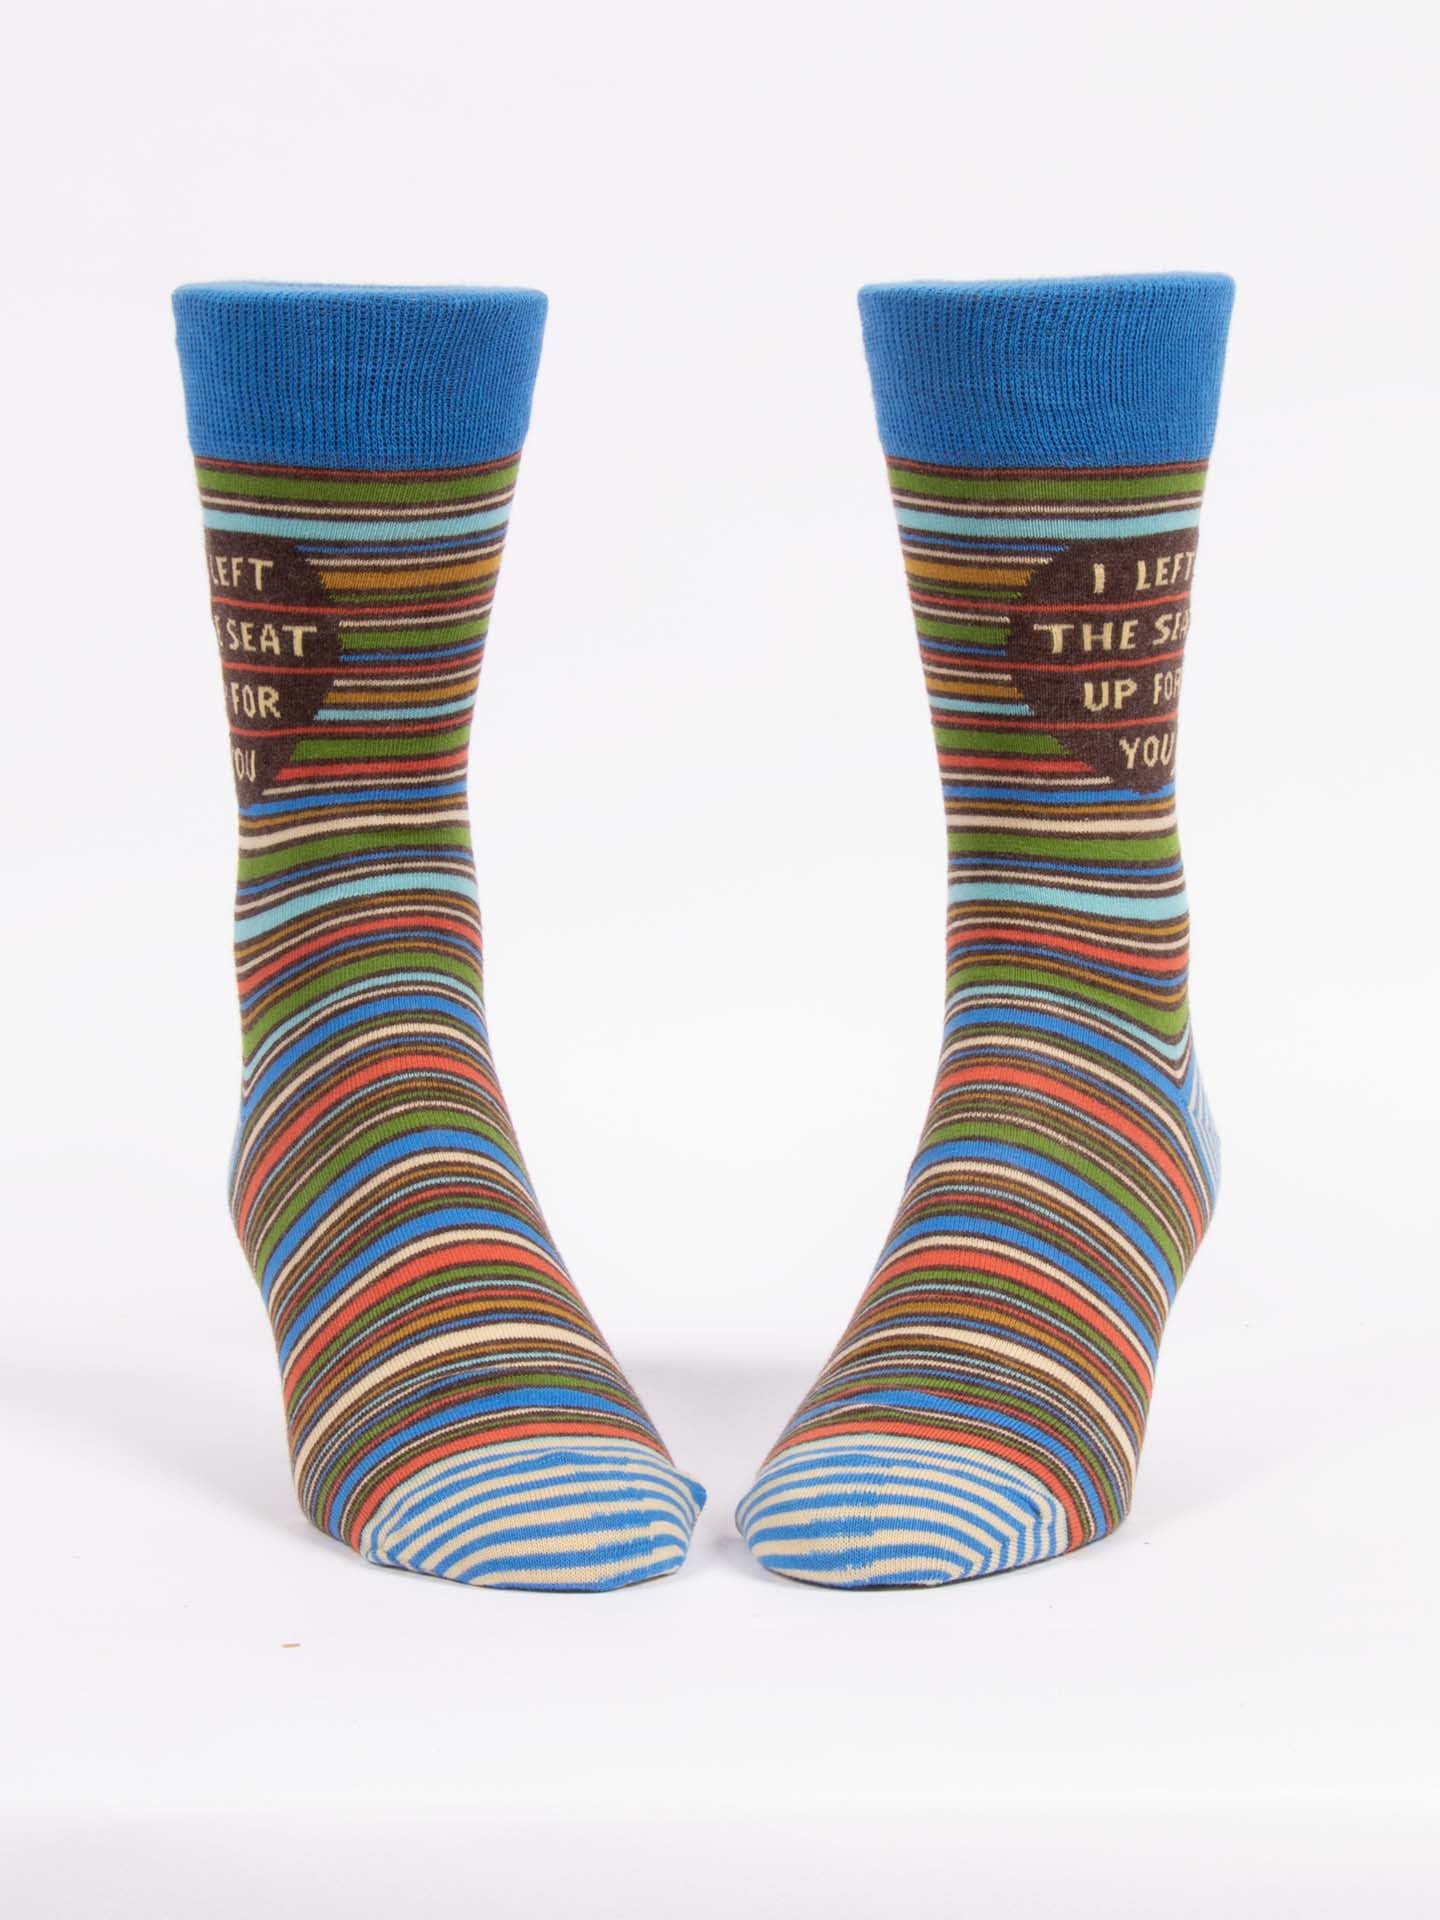 I Left The Seat Up For You - Men's Crew Socks - Mellow Monkey